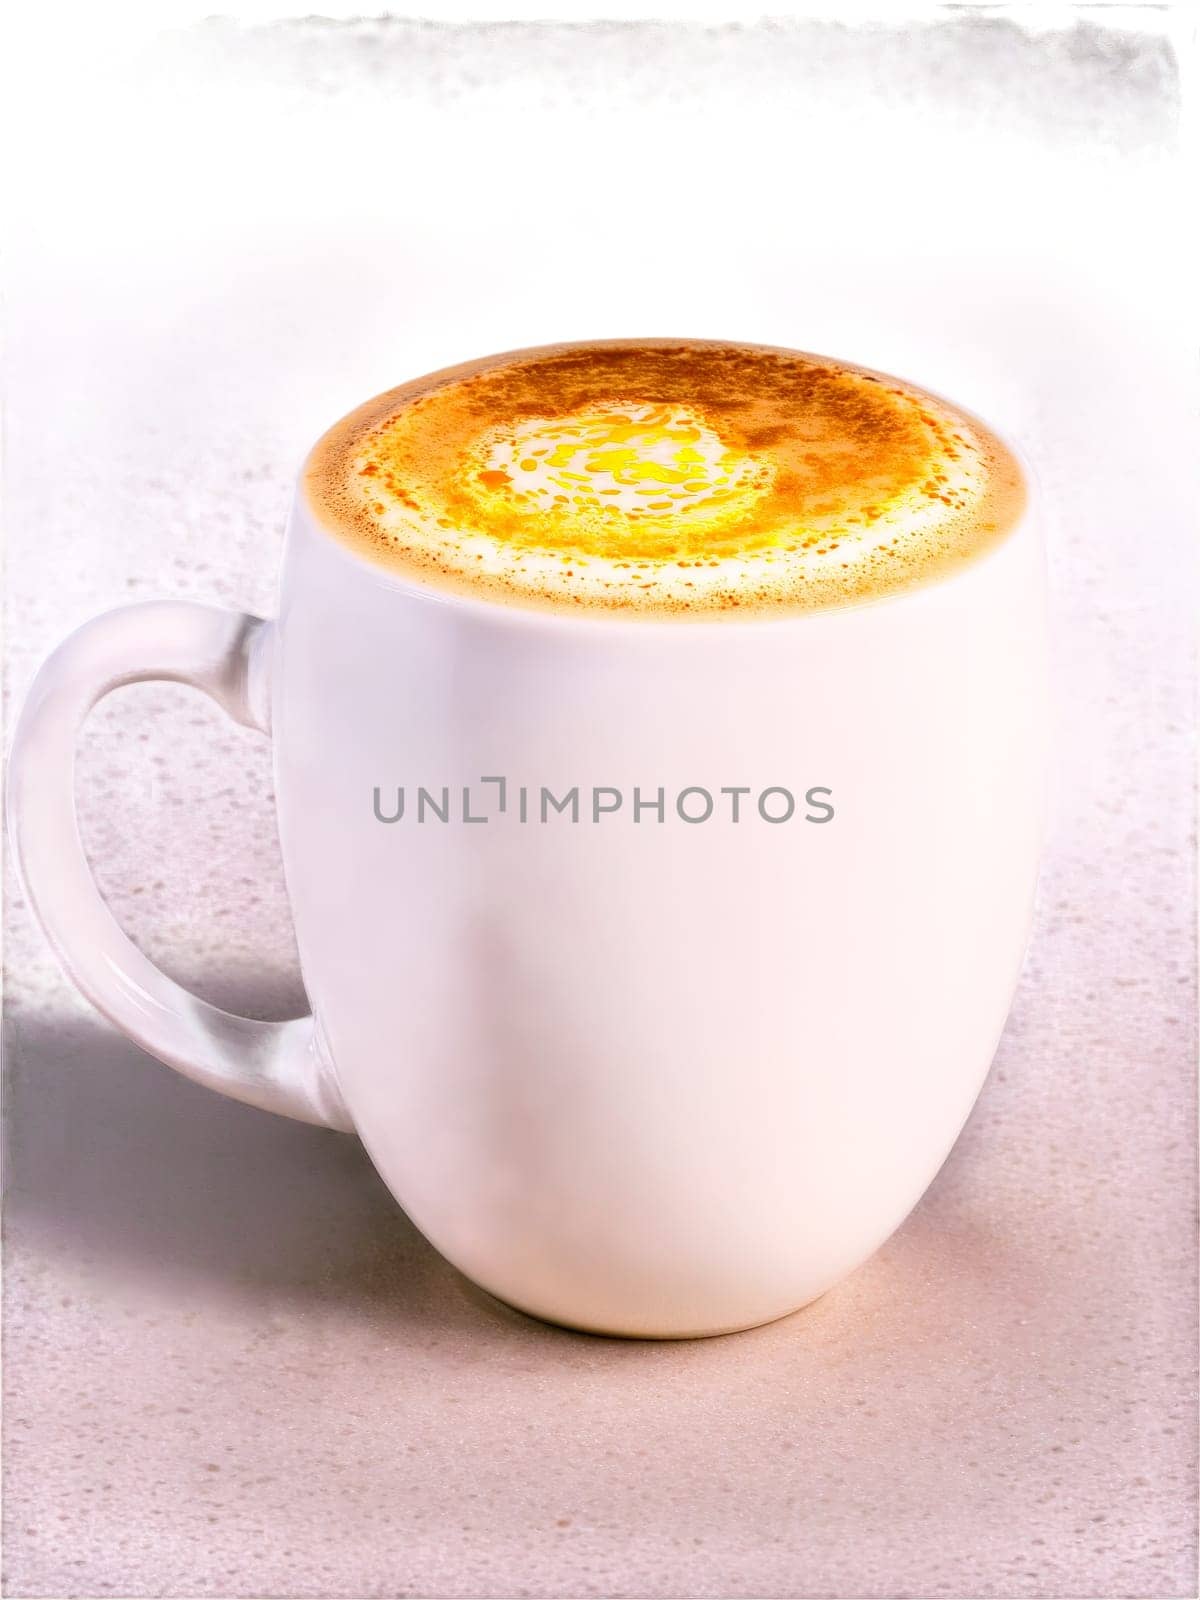 Vietnamese Egg Coffee ceramic mug with unique coffee beverage made with egg yolks condensed milk. Drink isolated on transparent background.